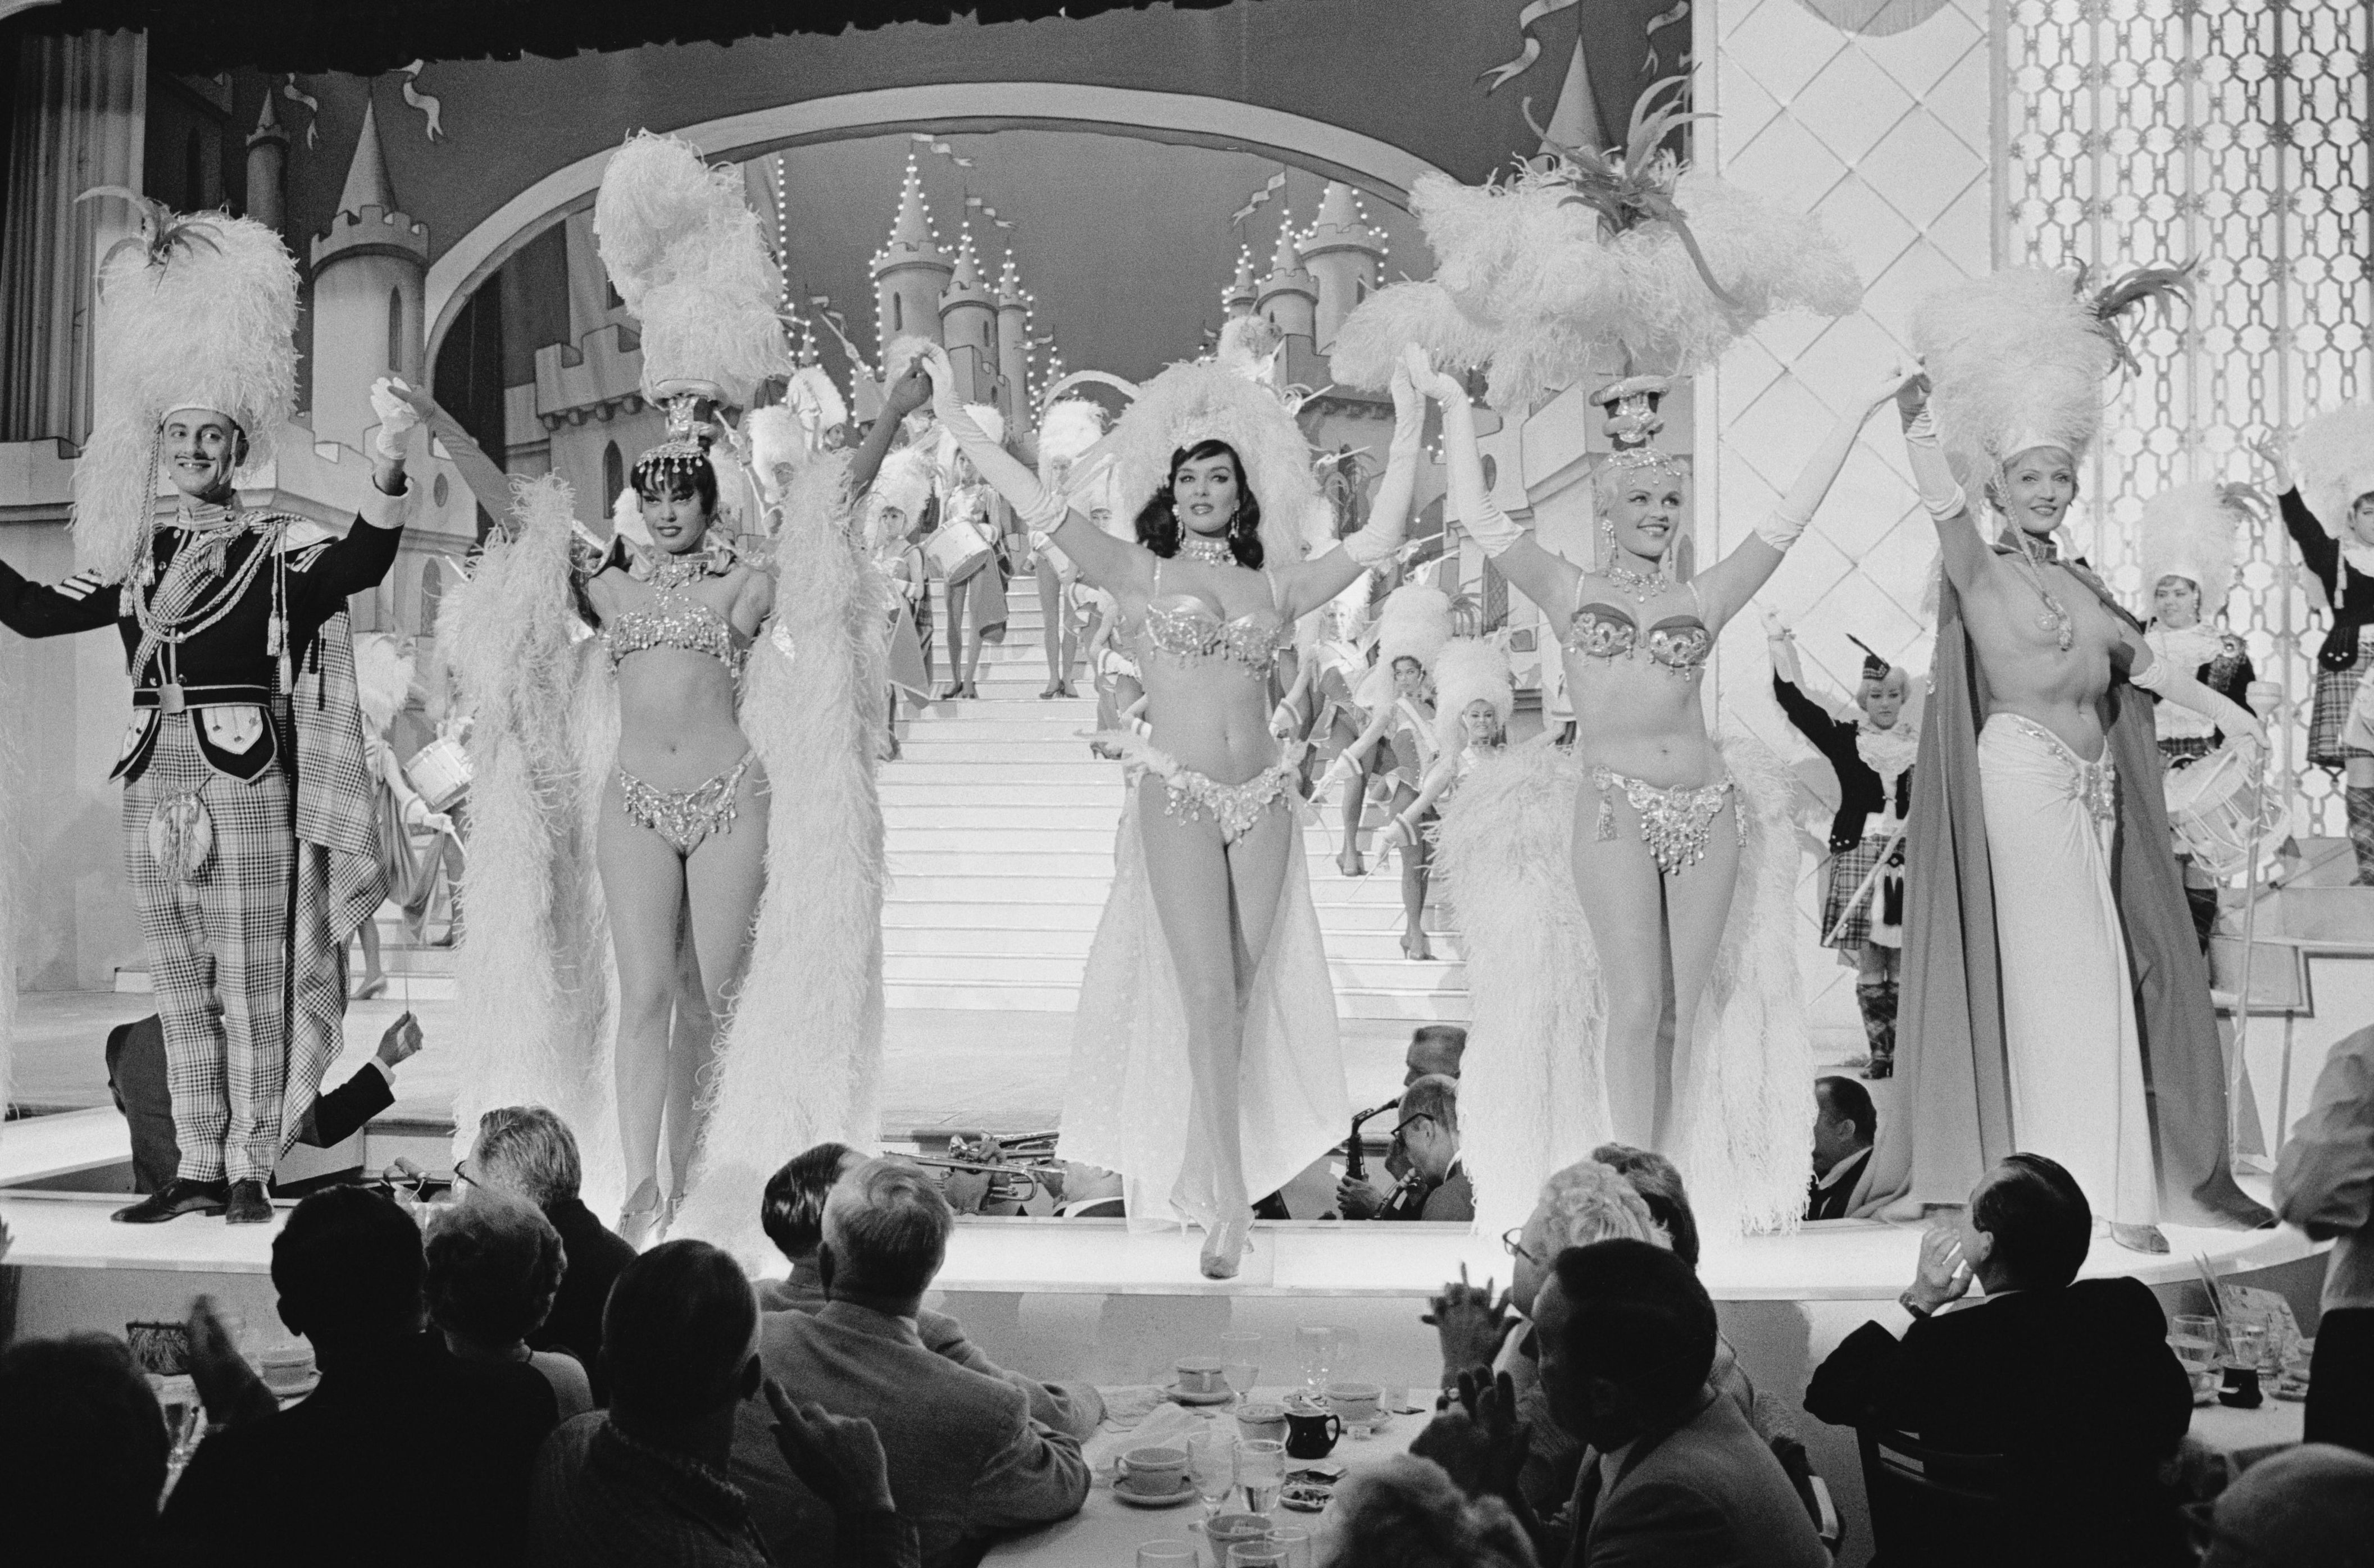 las vegas is betting on sports. the tropicana hotel, home of the showgirls, is a victim of the new era